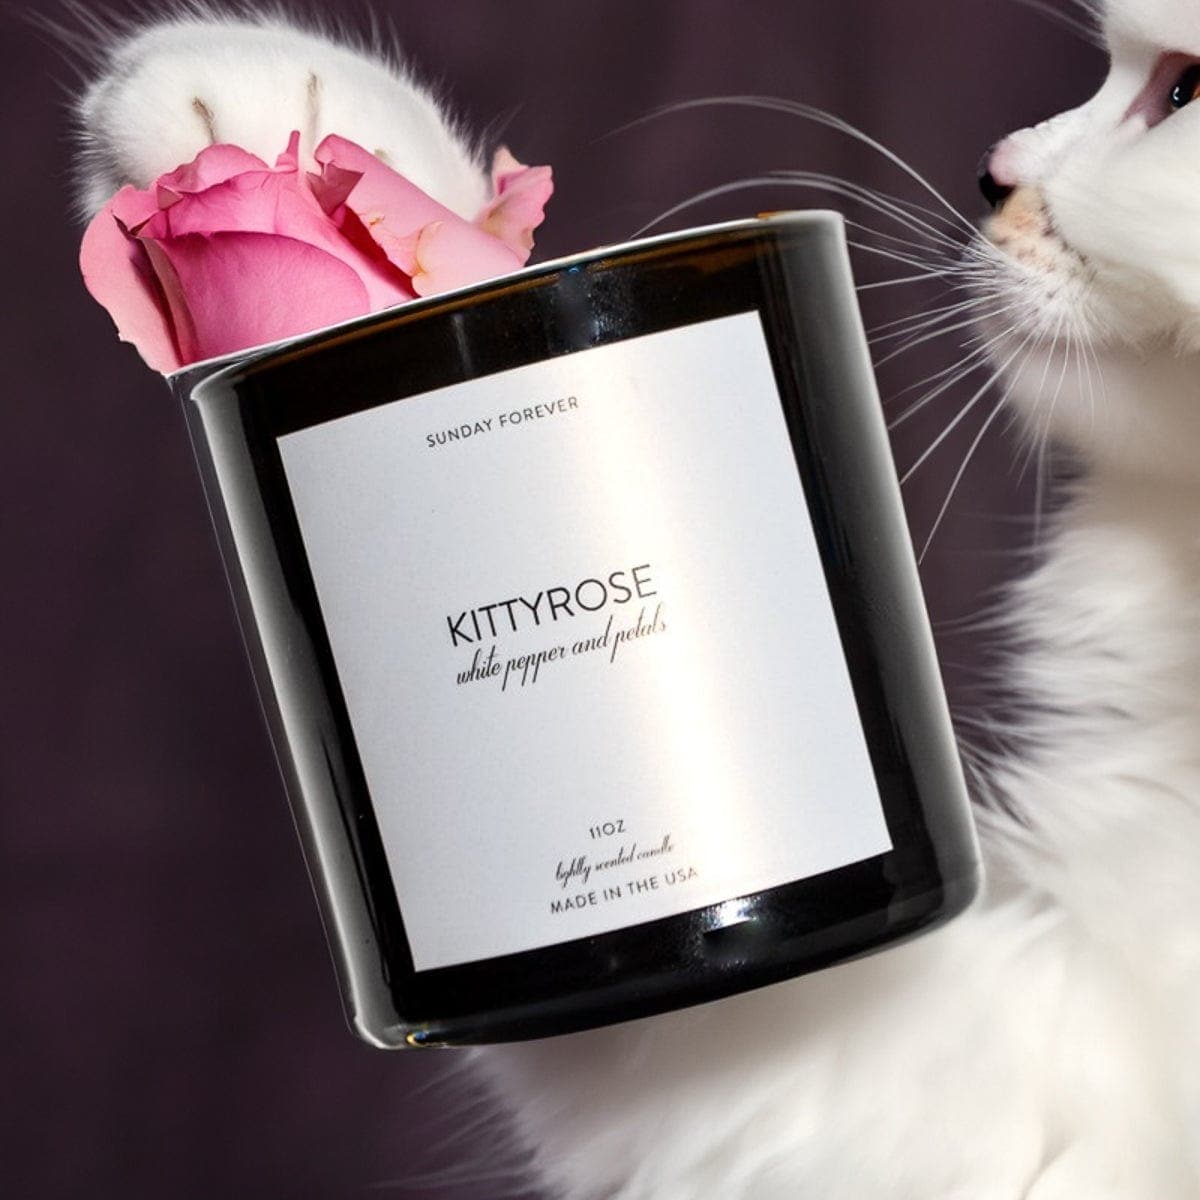 Sunday Forever Candles Kittyrose Luxury Candle with White Pepper and Rose